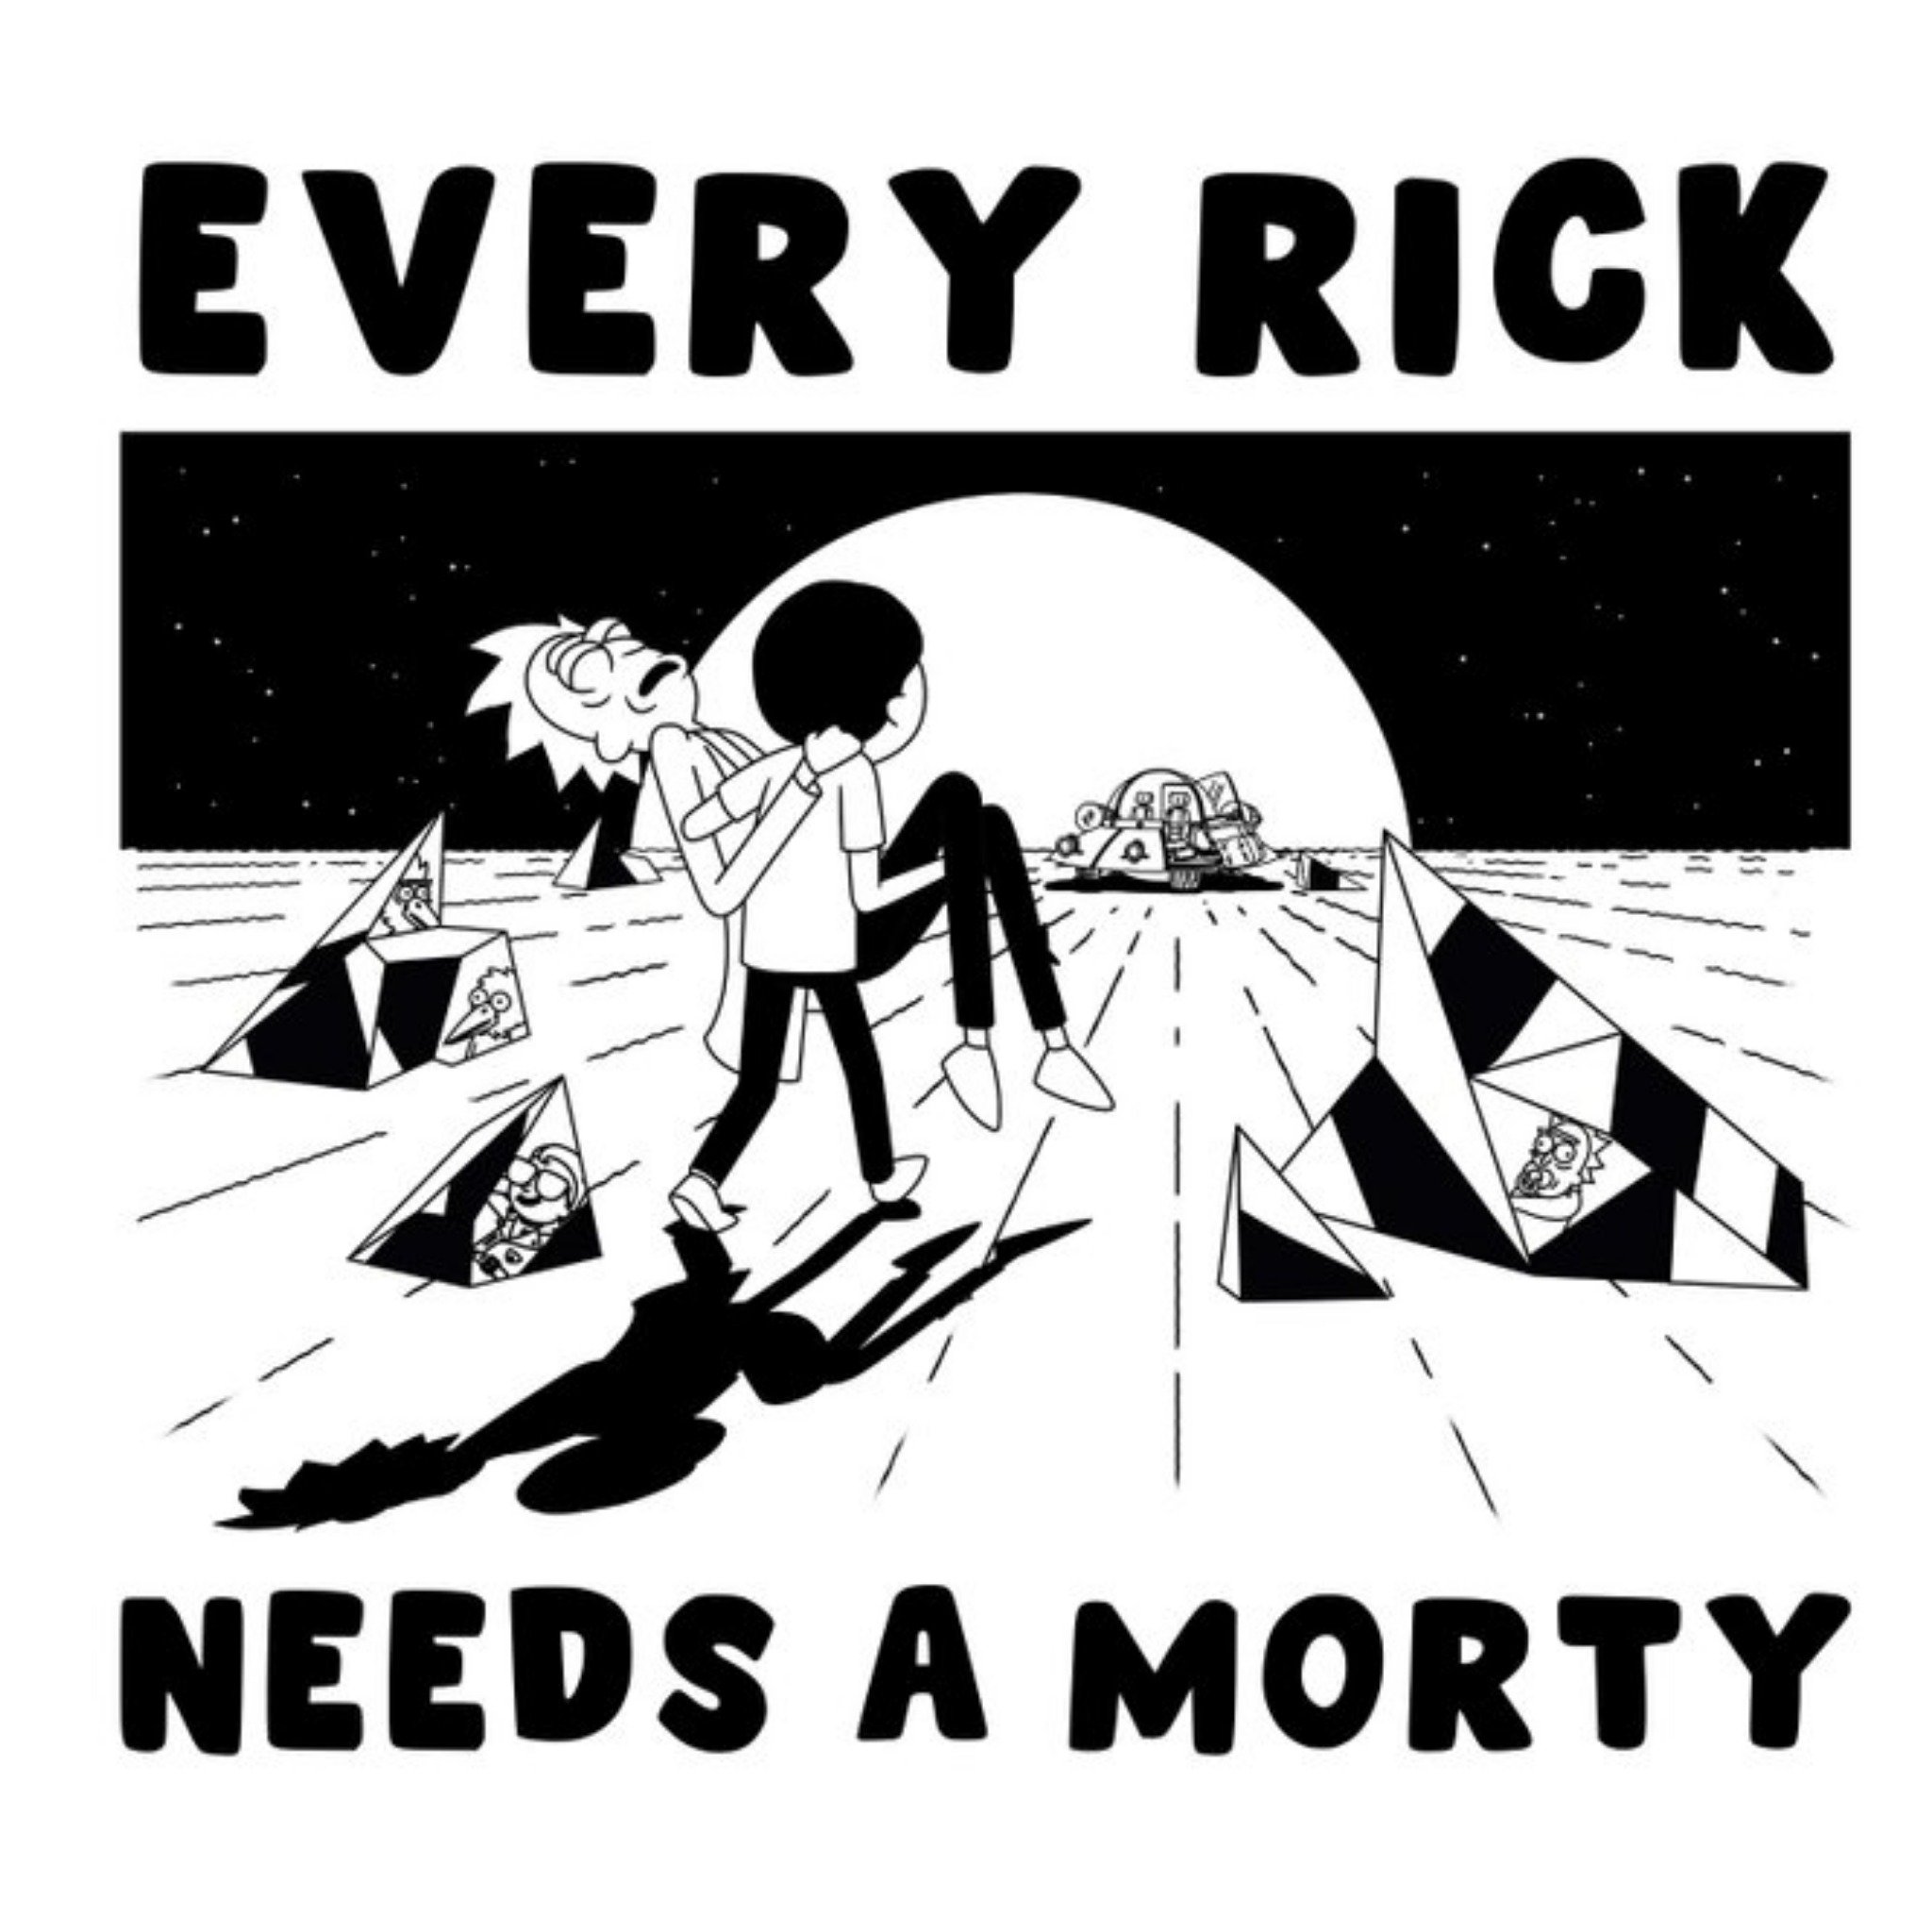 Moonpig Rick And Morty Funny Black And White Cartoon Birthday Card From Adult Swim, Square